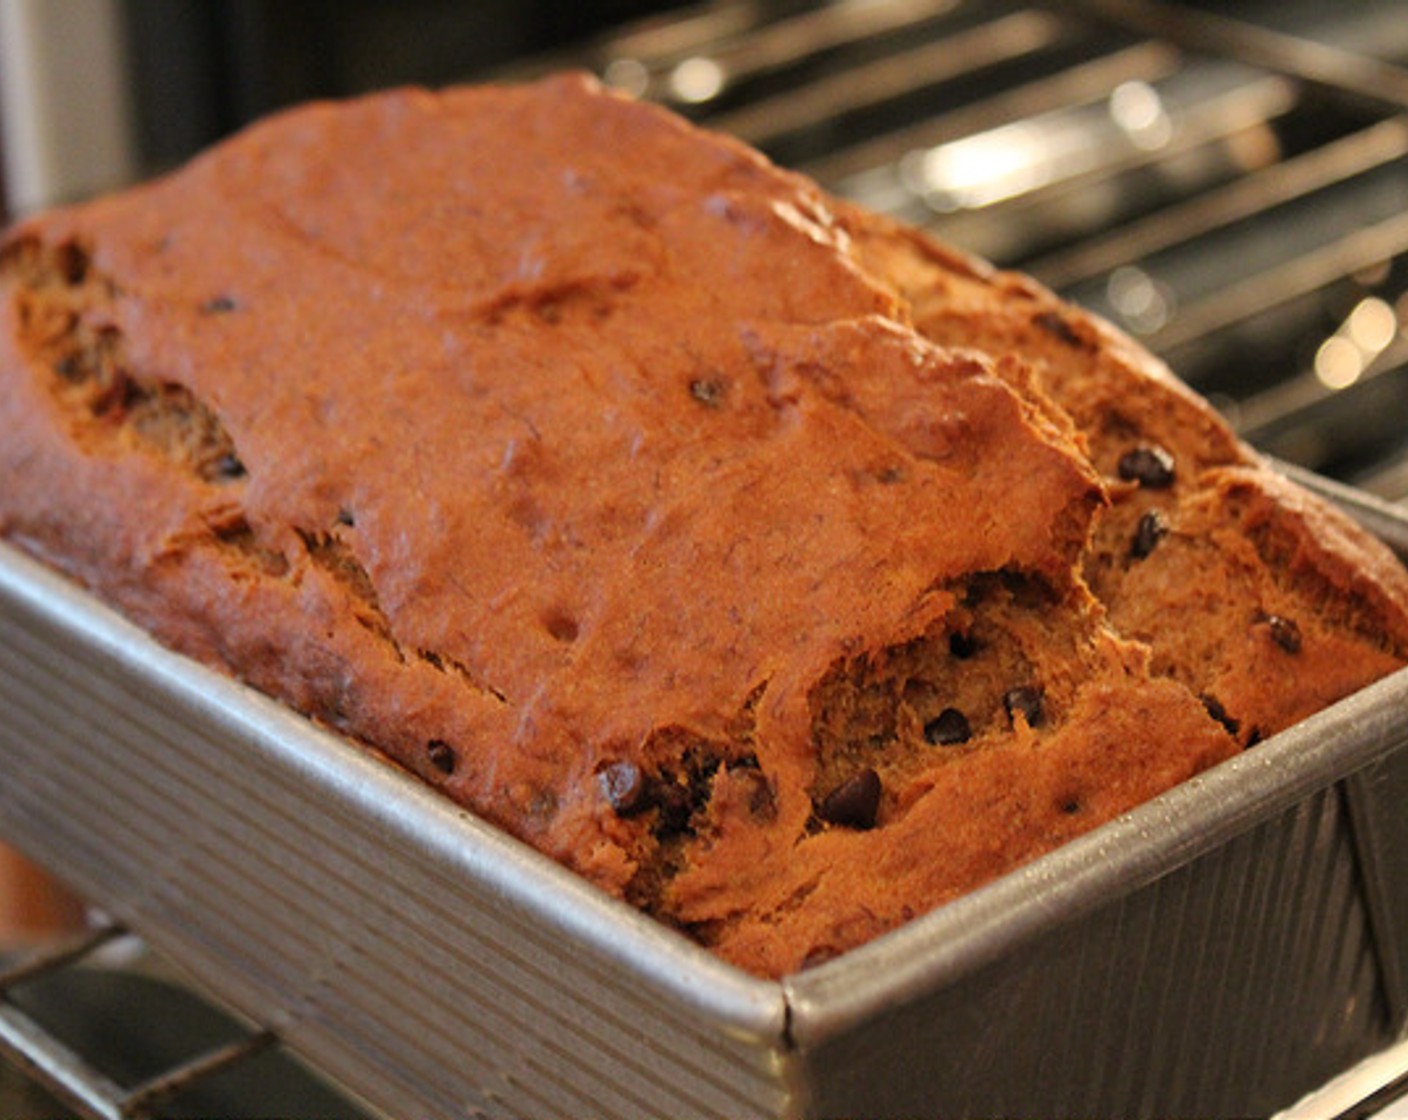 step 9 Let cool completely before slicing. Banana Bread should be light, moist and soft.